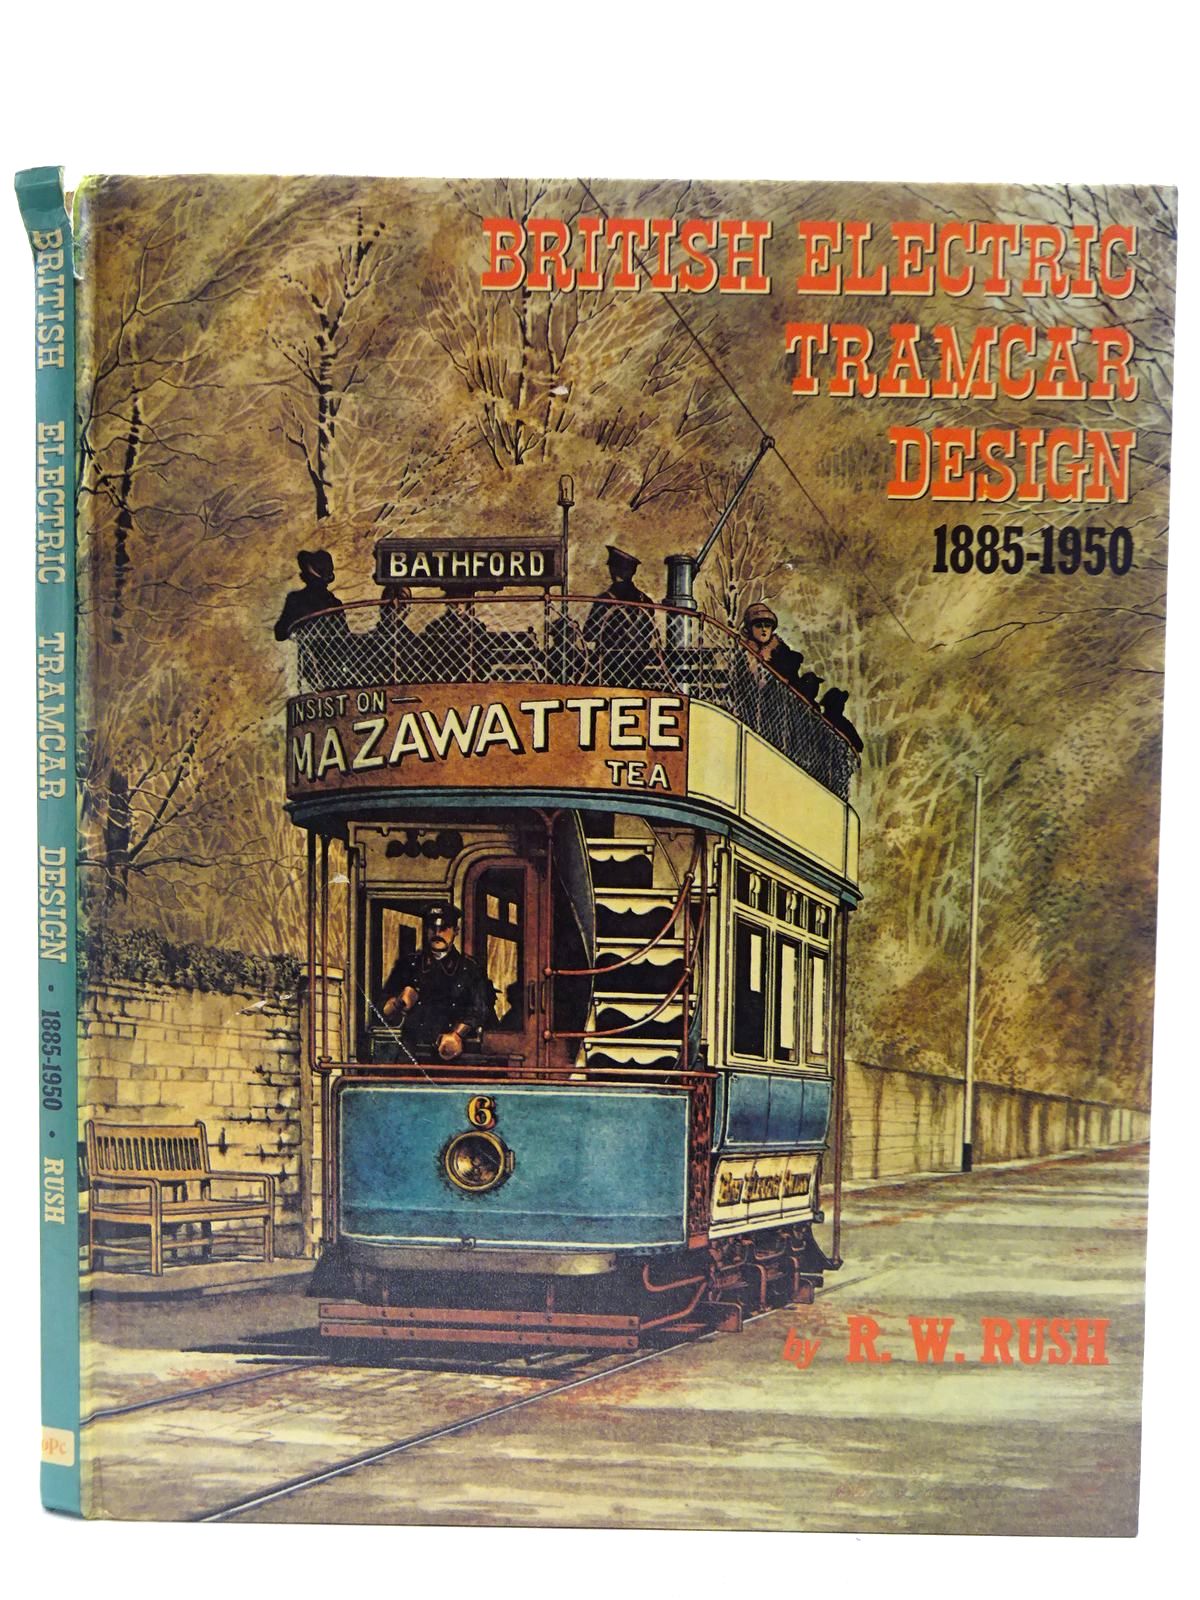 Photo of BRITISH ELECTRIC TRAMCAR DESIGNS 1885 - 1950 written by Rush, R.W. published by Oxford Publishing Co (STOCK CODE: 2128549)  for sale by Stella & Rose's Books